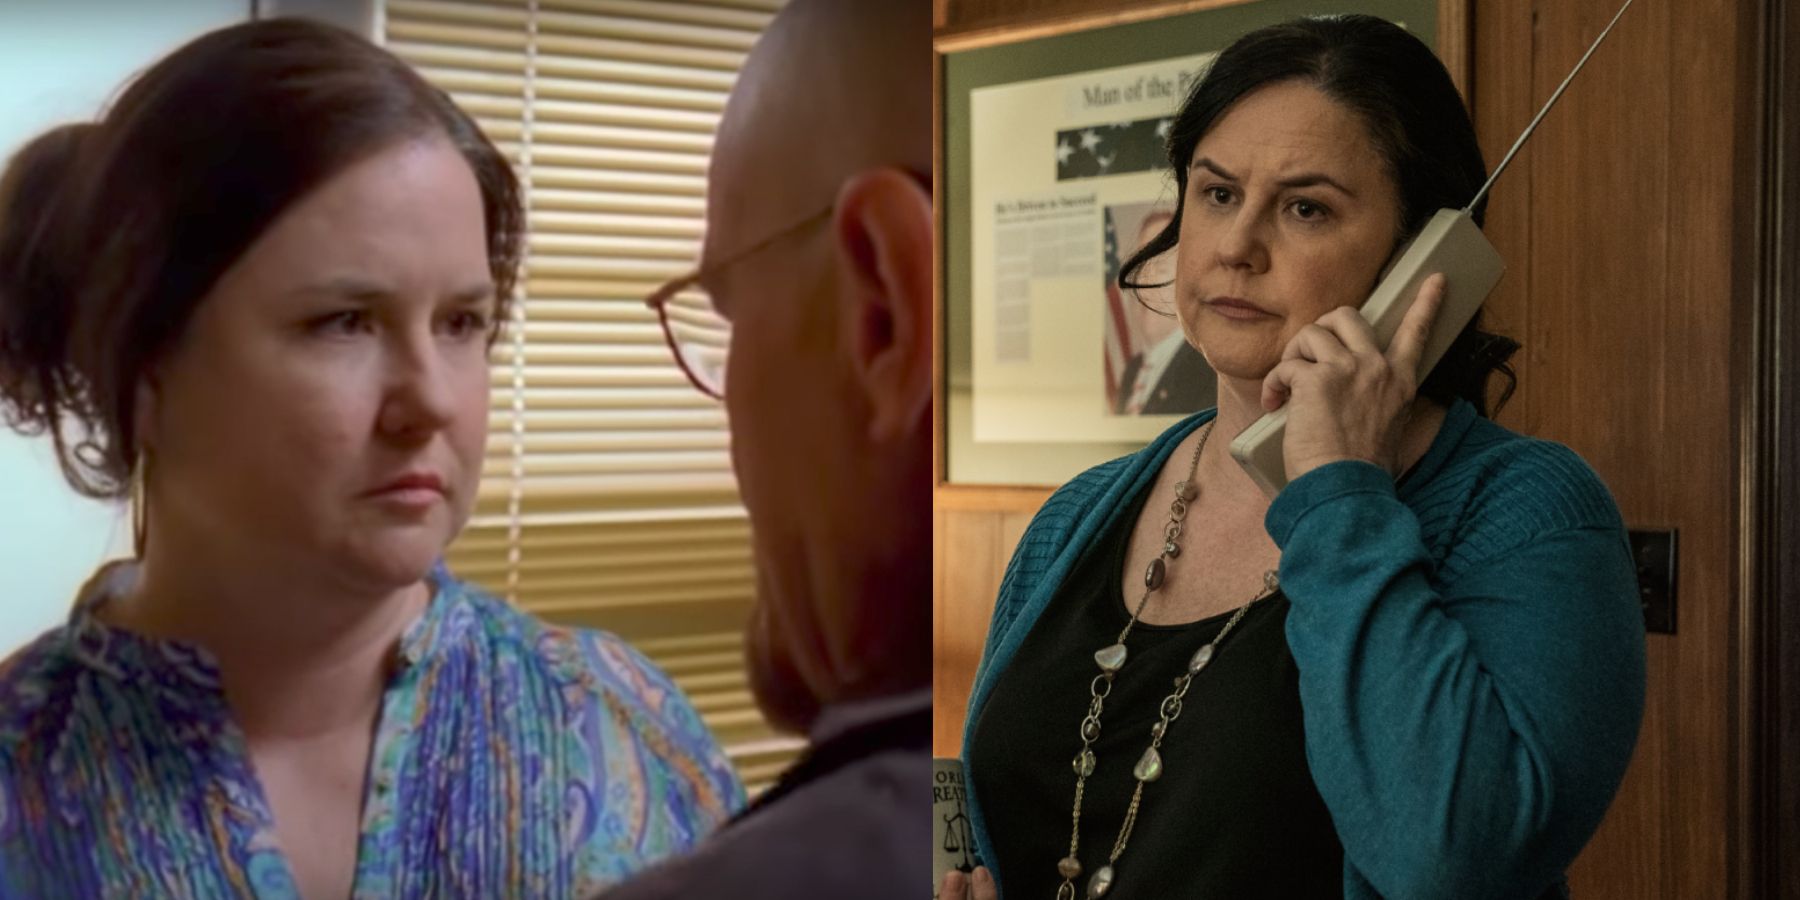 Tina Parker as Francesca in Breaking Bad and Better Call Saul